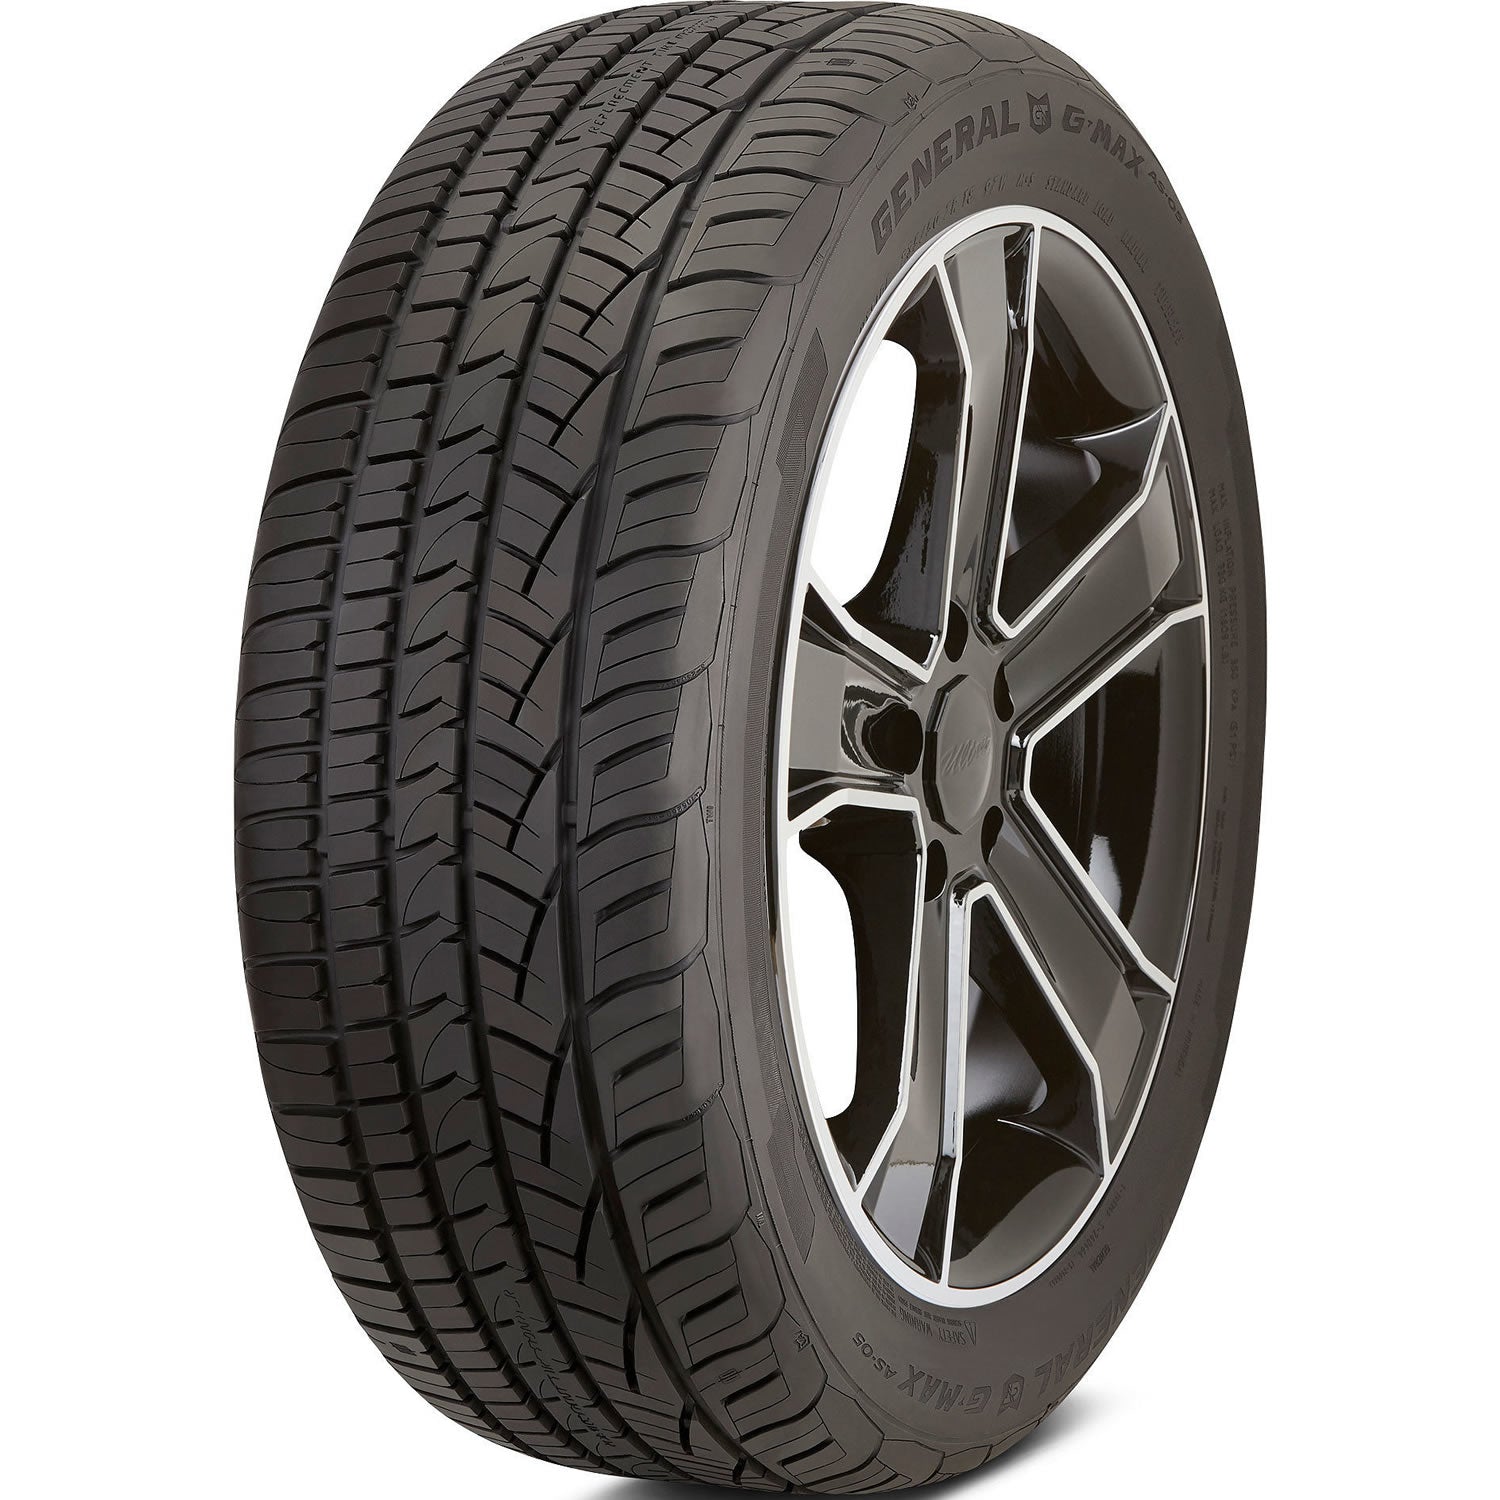 GENERAL G-MAX AS-05 225/55ZR17 (26.7X8.9R 17) Tires